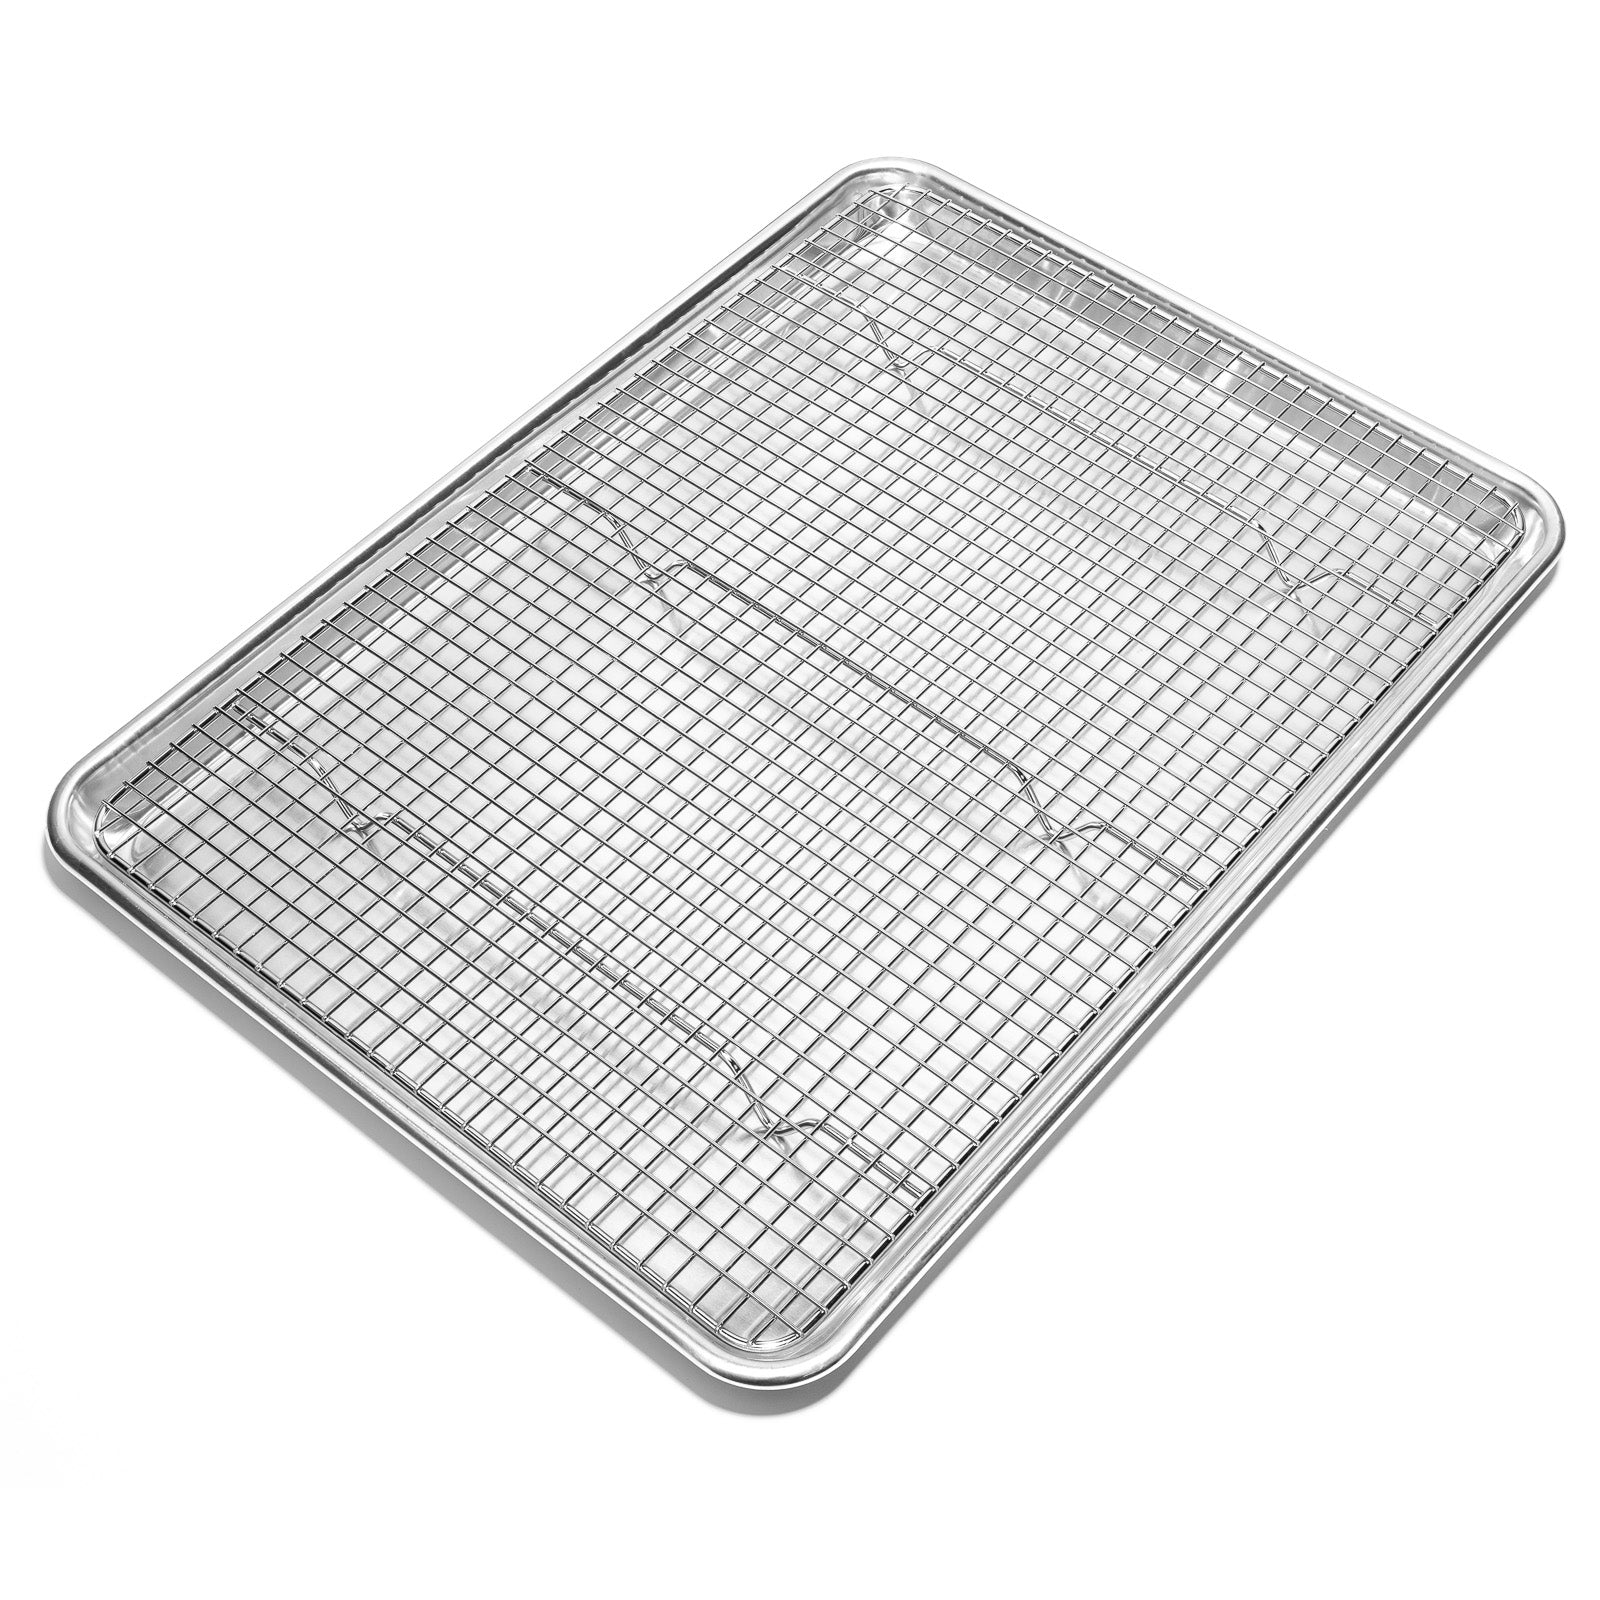 Stainless Steel Baking & Cooling Wire Rack